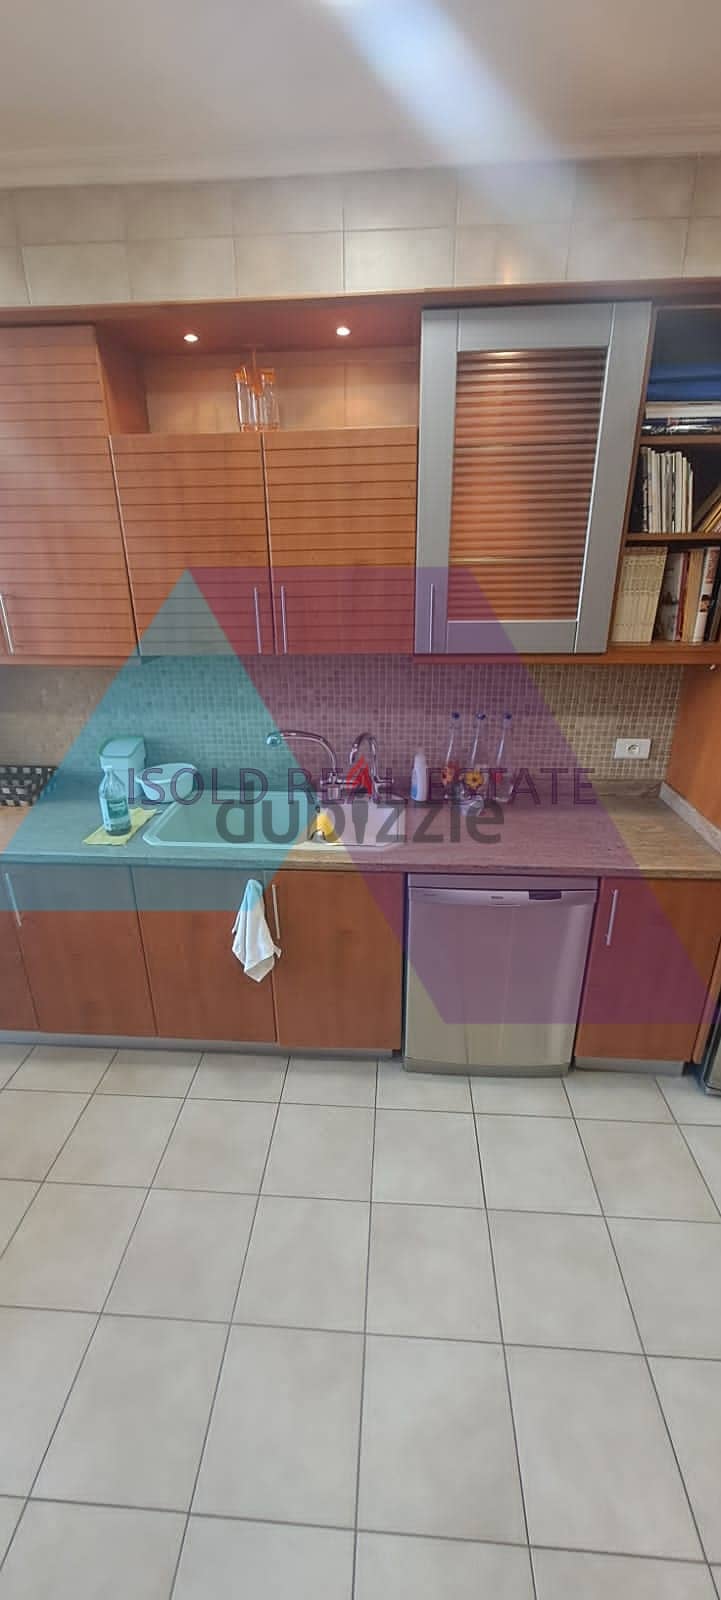 Furnished Lux 270 m2 apartment+terrace for rent in Baabda/Brazilia 3